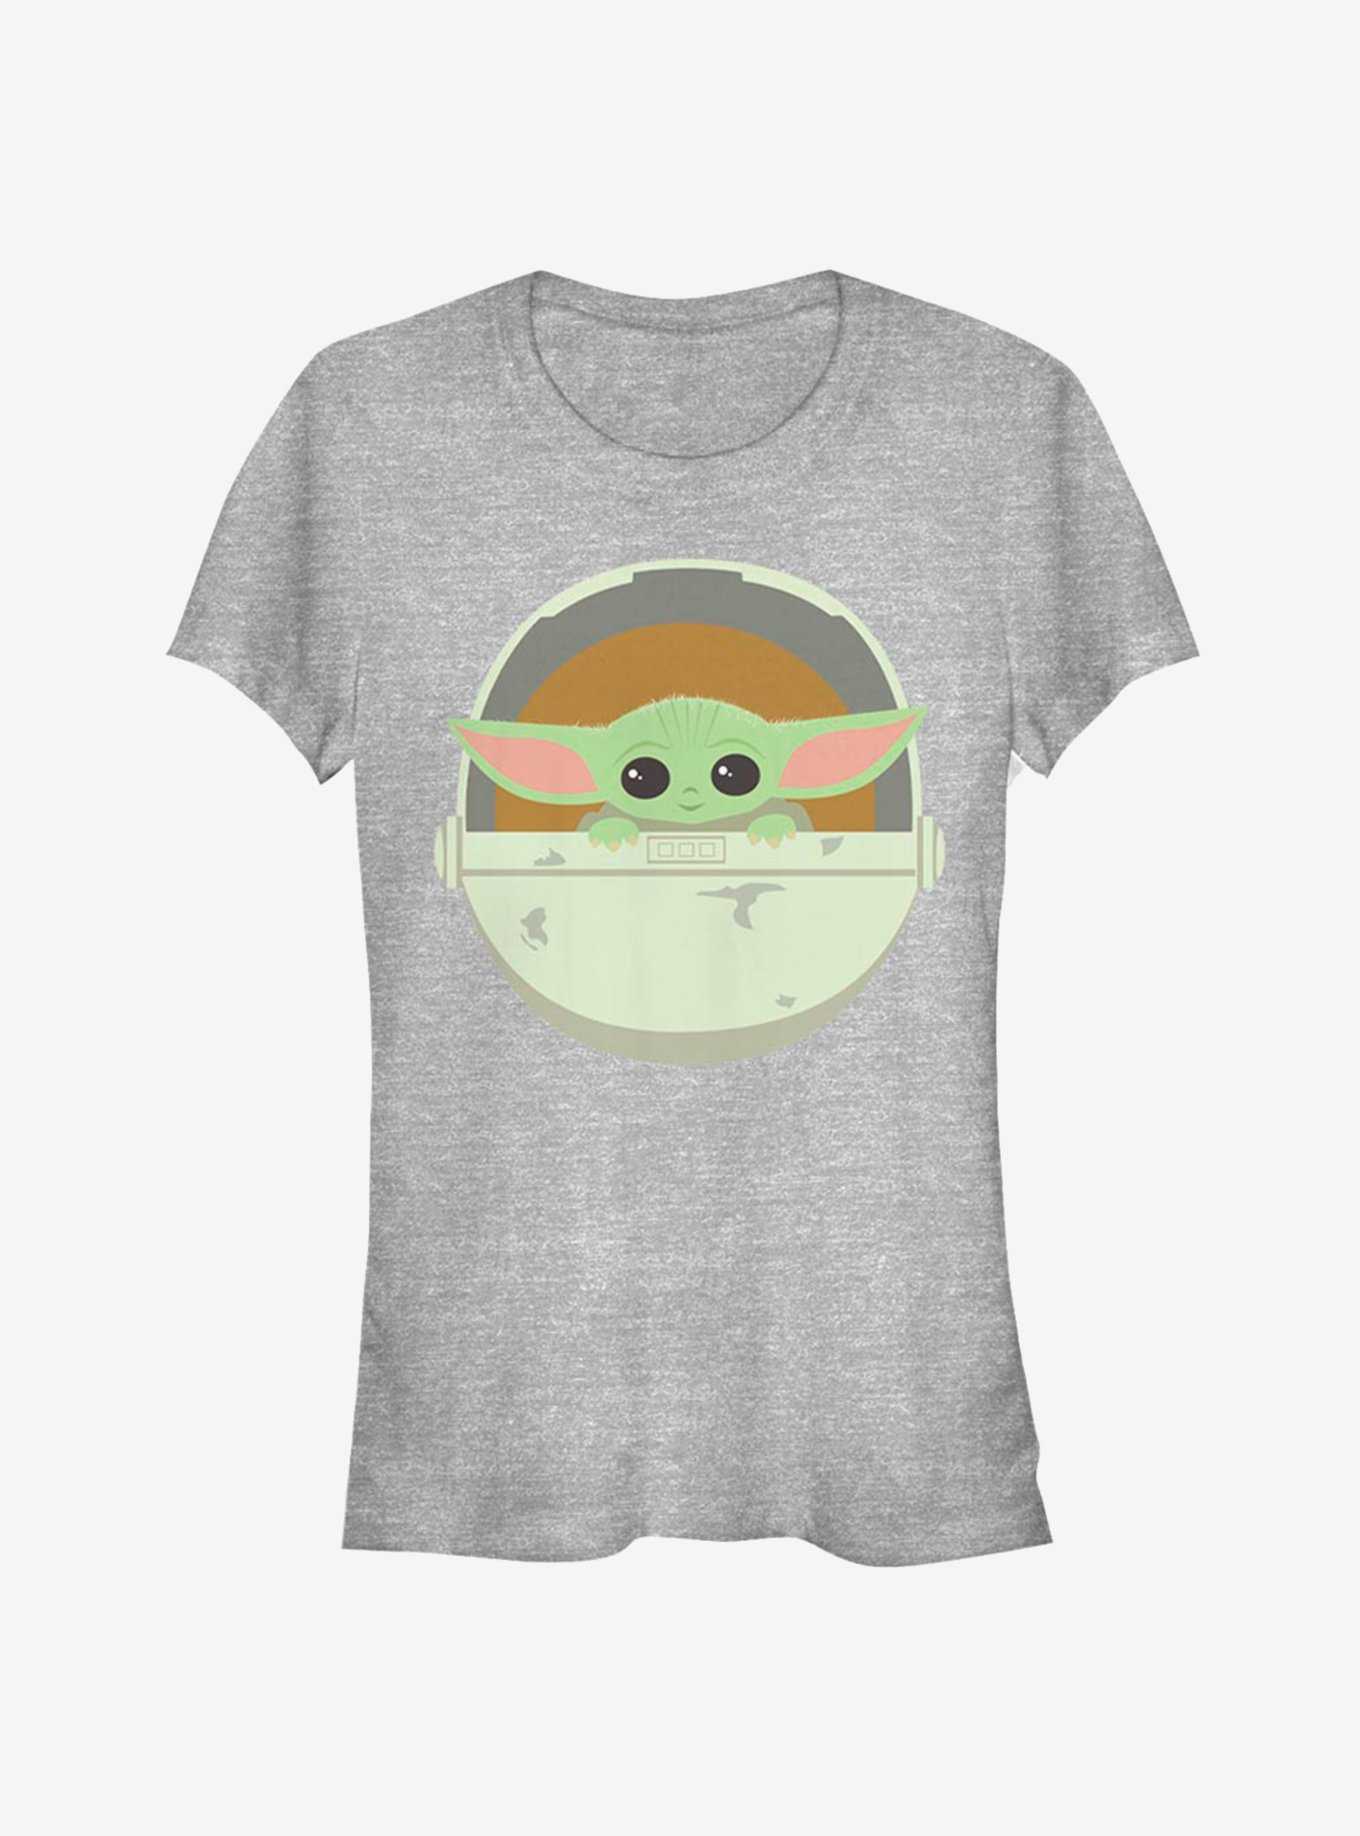 Star Wars The Mandalorian The Child SImple Carriage Girls T-Shirt, , hi-res